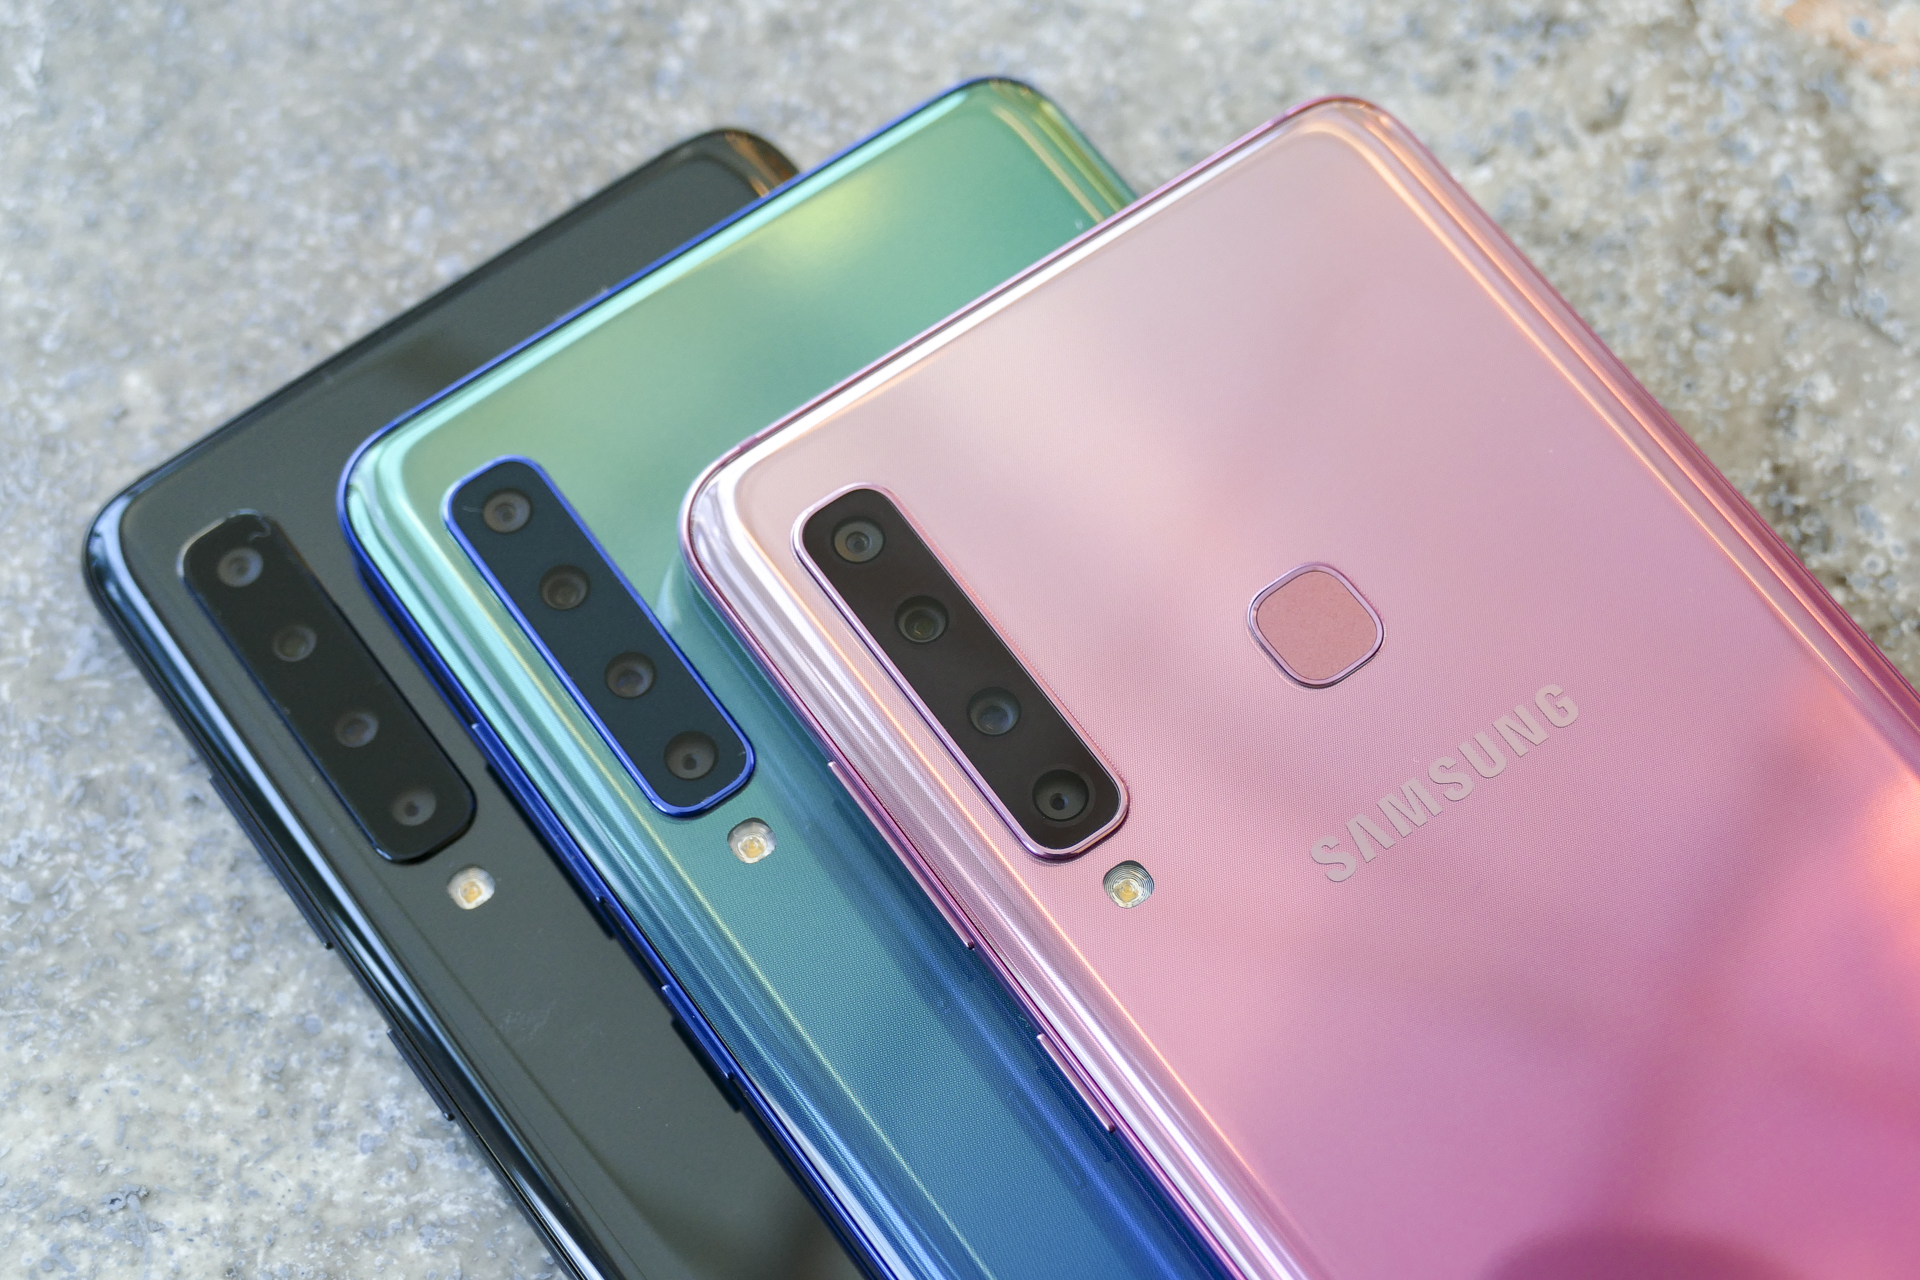 Samsung Galaxy A9 2018 Hands-on Review